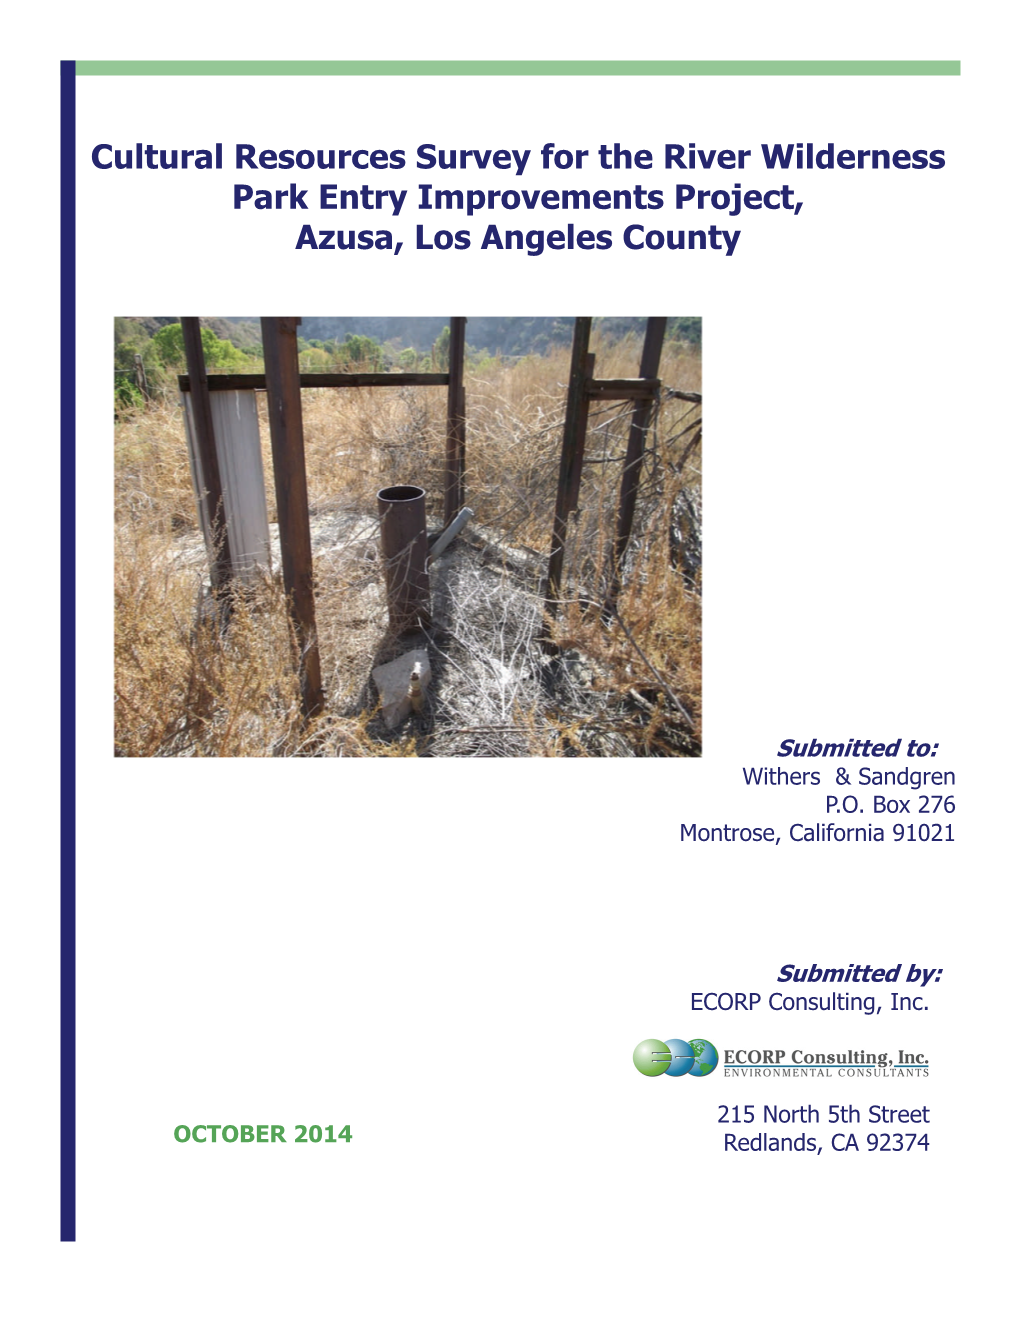 Cultural Resources Survey for the River Wilderness Park Entry Improvements Project, Azusa, Los Angeles County